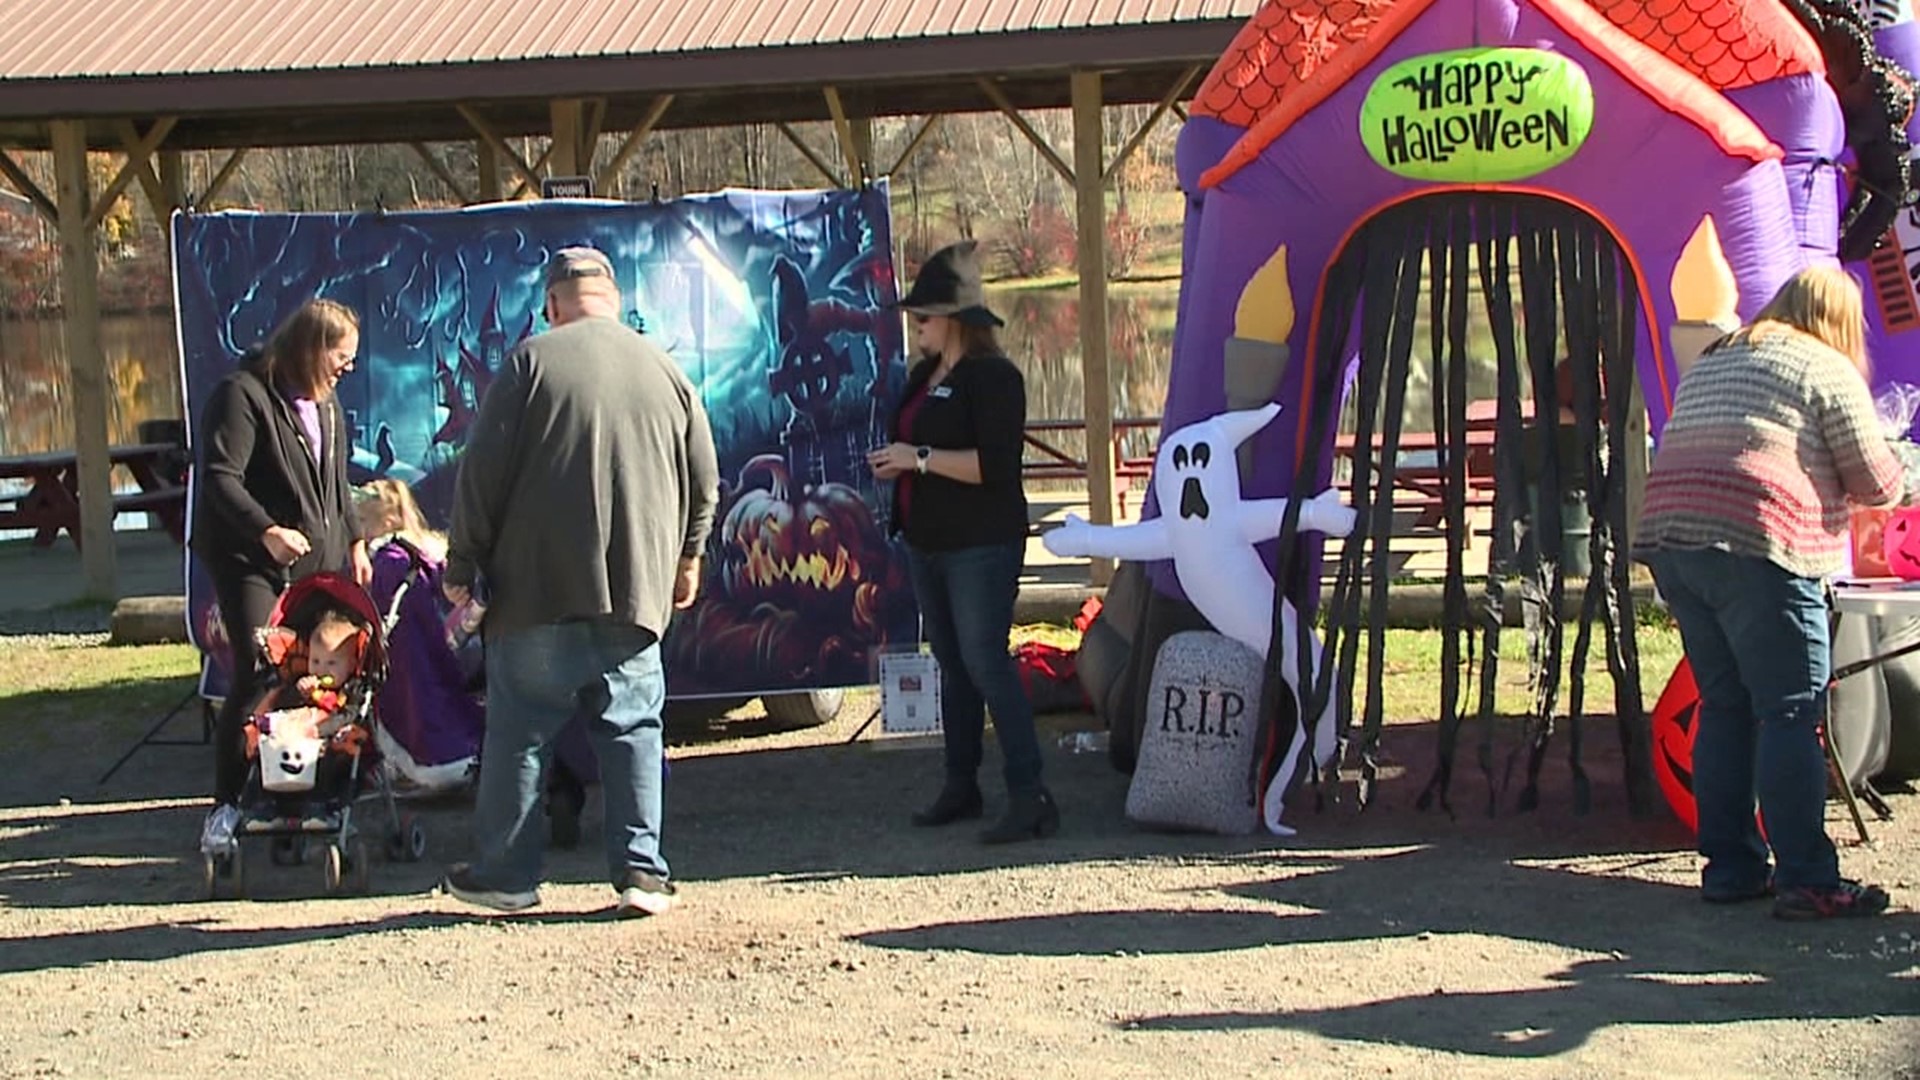 Halloween is almost here, and there are celebrations happening all over our area, including one in Susquehanna County.